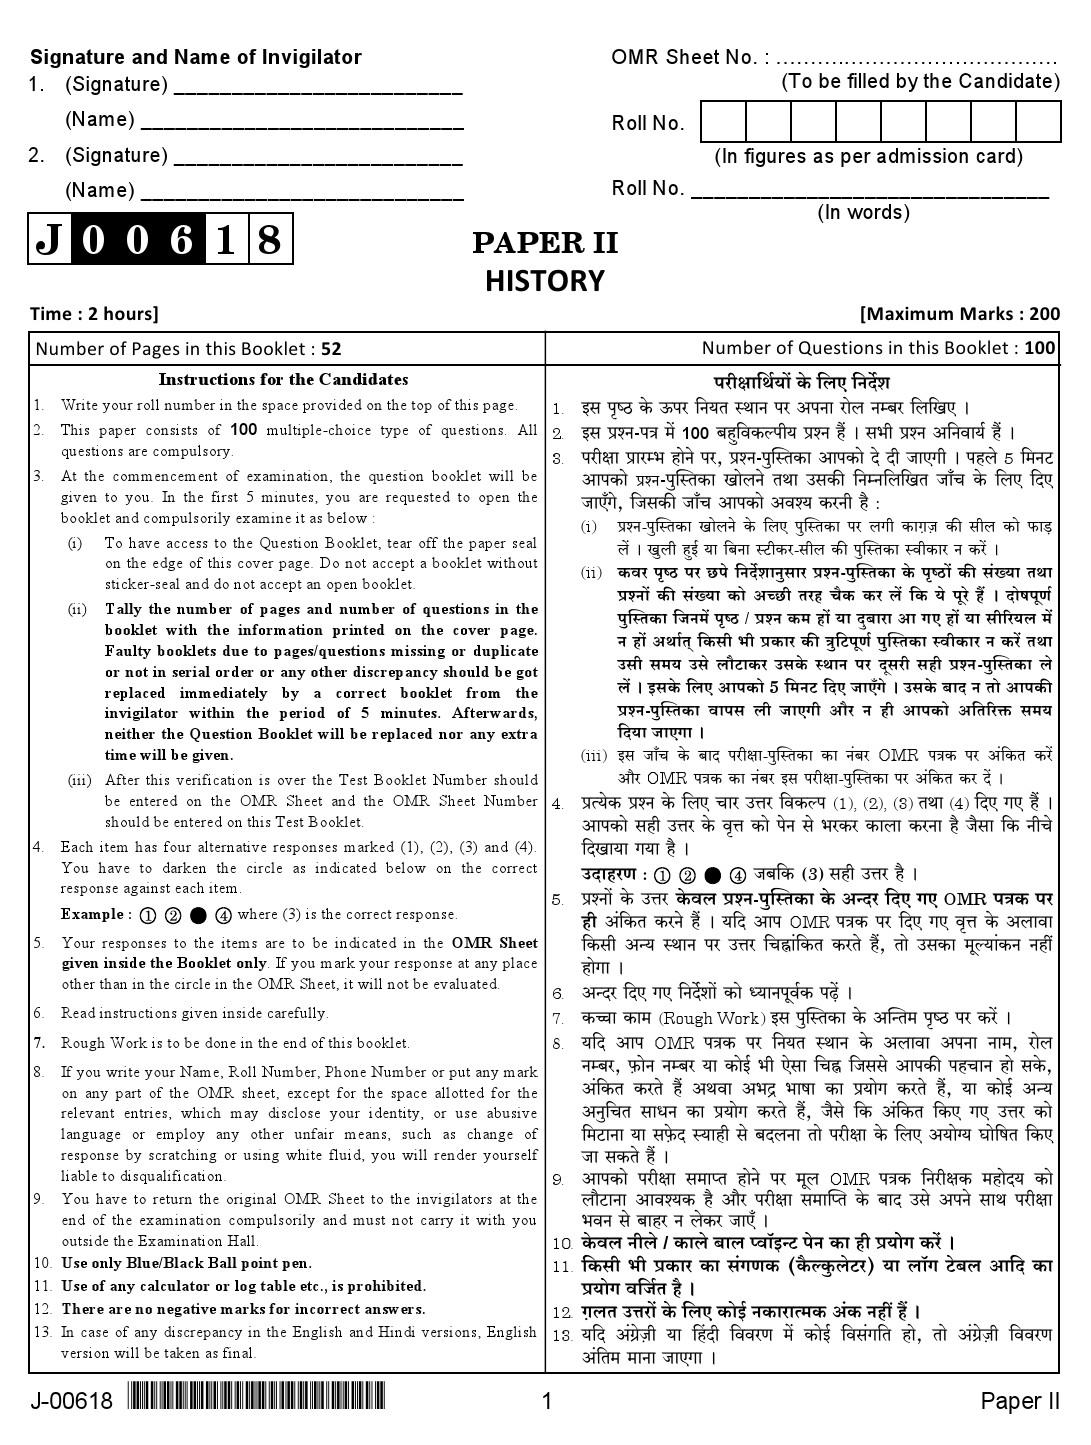 History Question Paper II July 2018 in English 2nd Exam 1